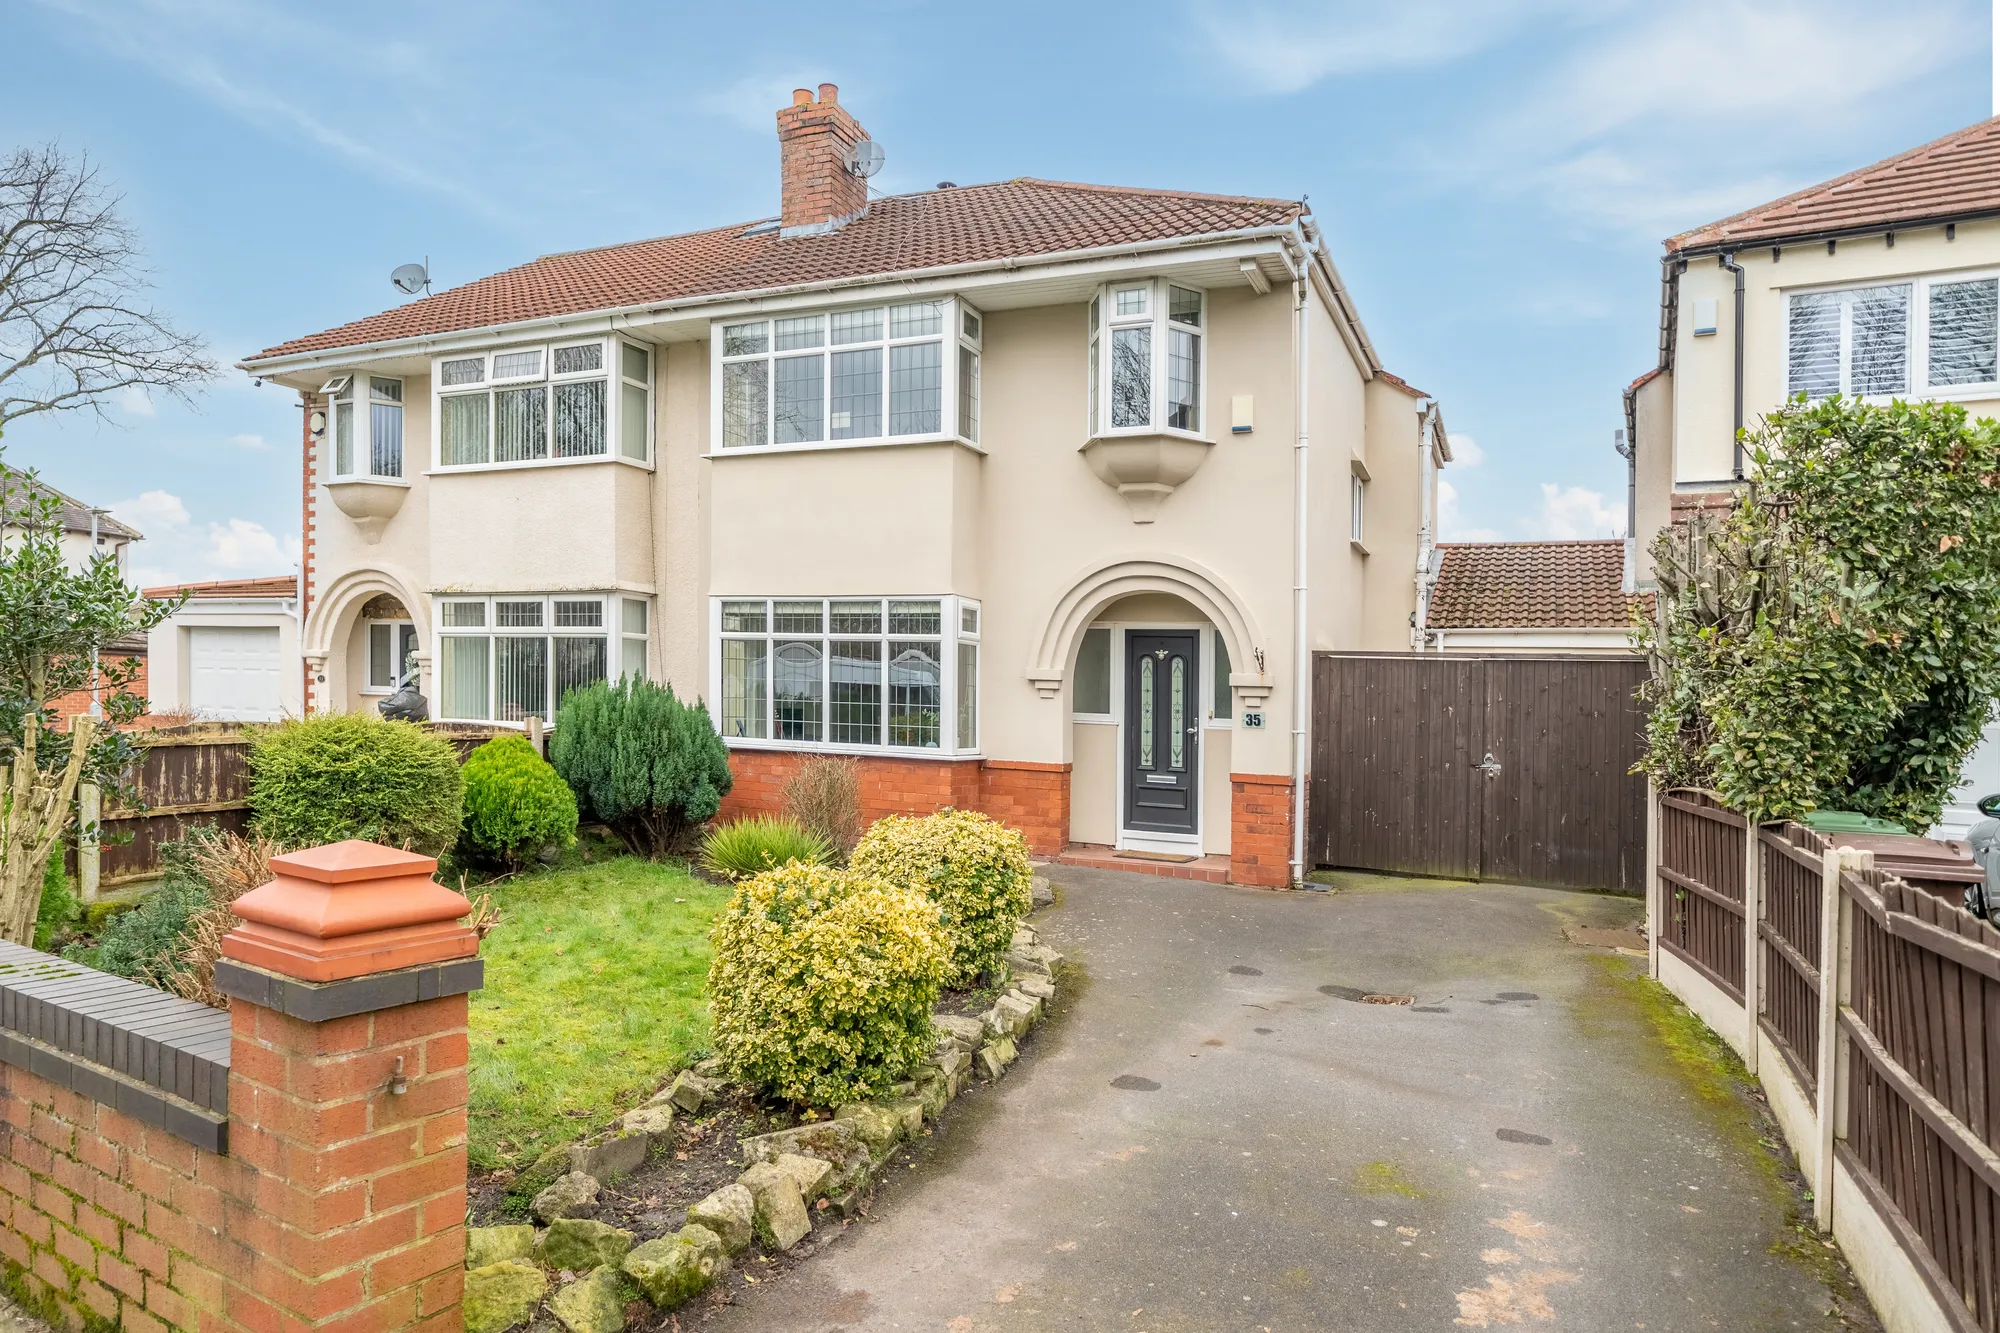 3 bed semi-detached house for sale in Moorside Road, Liverpool - Property Image 1